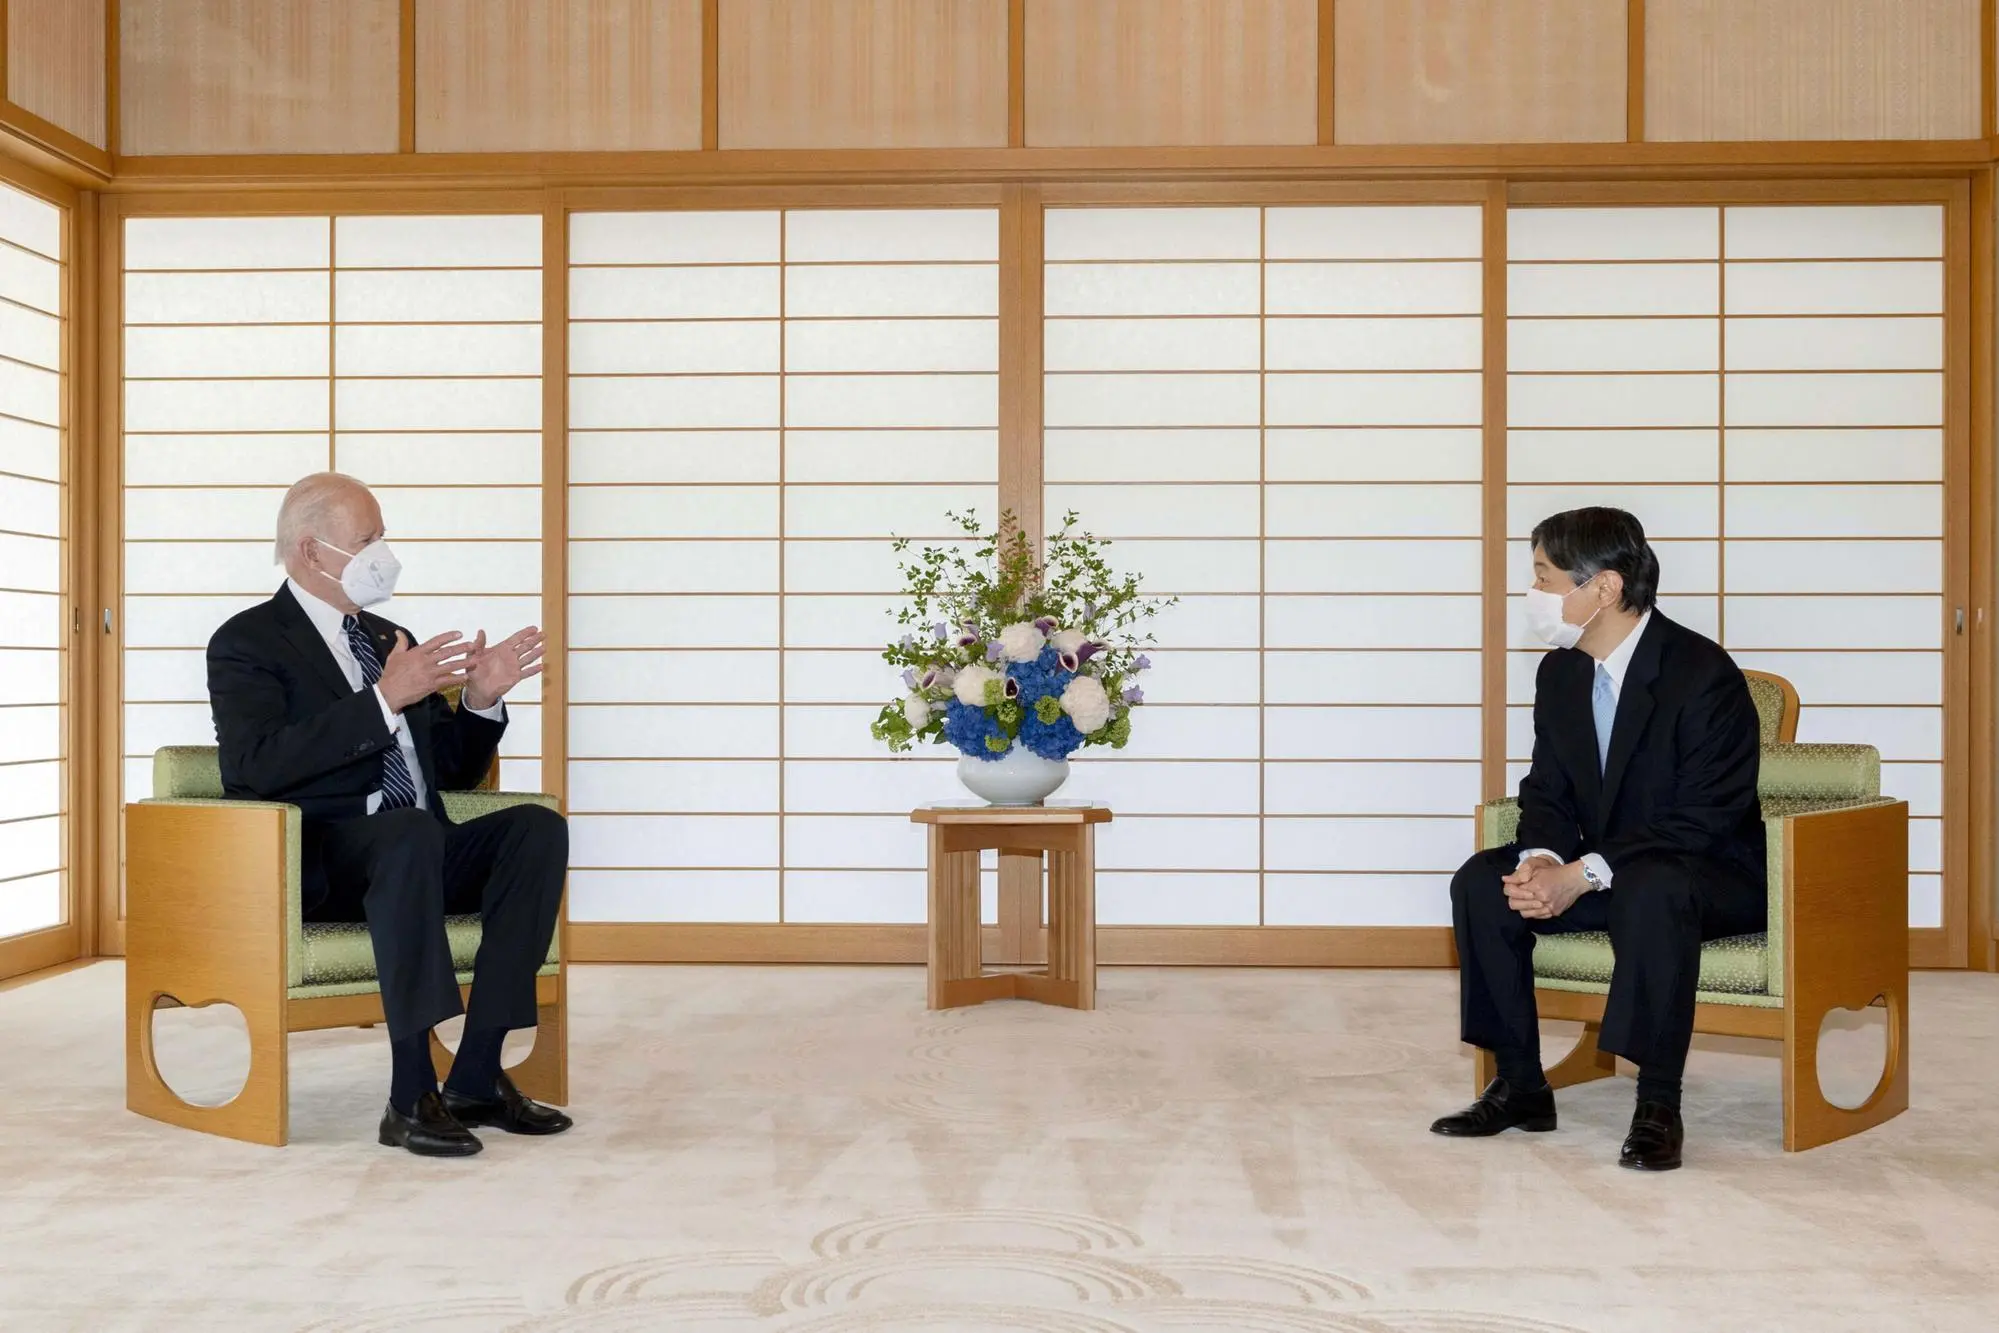 epa09969111 A handout photo made available by Japan's Imperial Household Agency and provided via Jiji Press shows US President Joe Biden (L) meeting with Japan's Emperor Naruhito at the Imperial Palace in Tokyo, Japan, 23 May 2022. Biden is in Japan for a three-day official visit. EPA/IMPERIAL HOUSEHOLD AGENCY HANDOUT IMPERIAL HOUSEHOLD AGENCY HANDOUT/EDITORIAL USE ONLY/NO SALES/NO COMMERCIAL USE/NO MODIFICATION INCLUDING TRIMMING/MANDATORY CREDIT/JAPAN OUT HANDOUT EDITORIAL USE ONLY/NO SALES